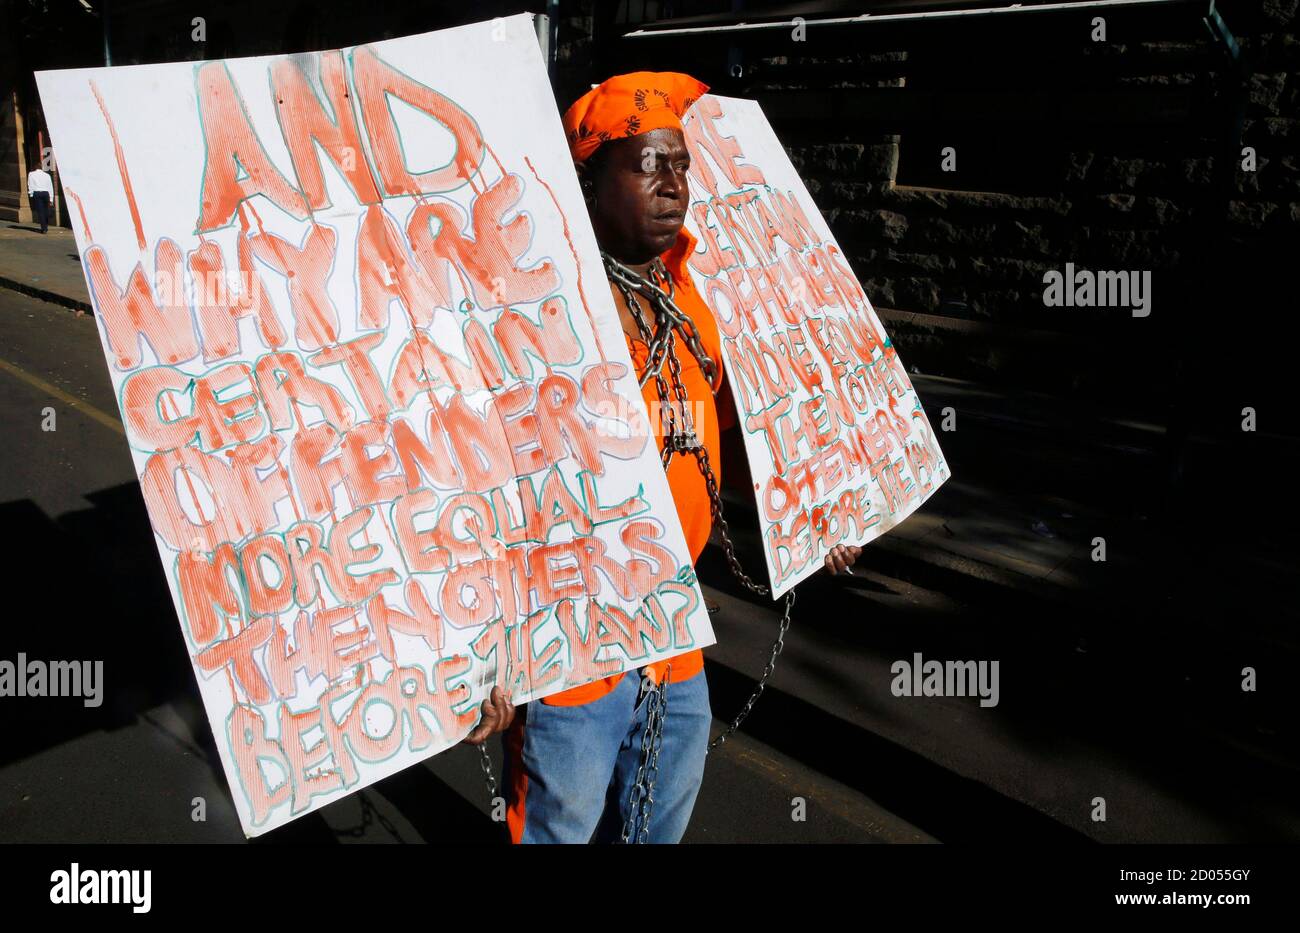 Prisoner rights activist Miles Bhudu holds placards outside the court where Oscar Pistorius was being tried in Pretoria October 21, 2014. As Pistorius spent his first day behind bars this week, a suspected child rapist and murderer went on trial at the same Pretoria court in a case that has also provoked fierce debate about crime and punishment in post-apartheid South Africa. Although the two defendants, one wealthy and white, the other poor and black, are from opposite ends of a still-divided society, both cases have revealed an alarming lack of faith in the justice system of the 'Rainbow Nat Stock Photo